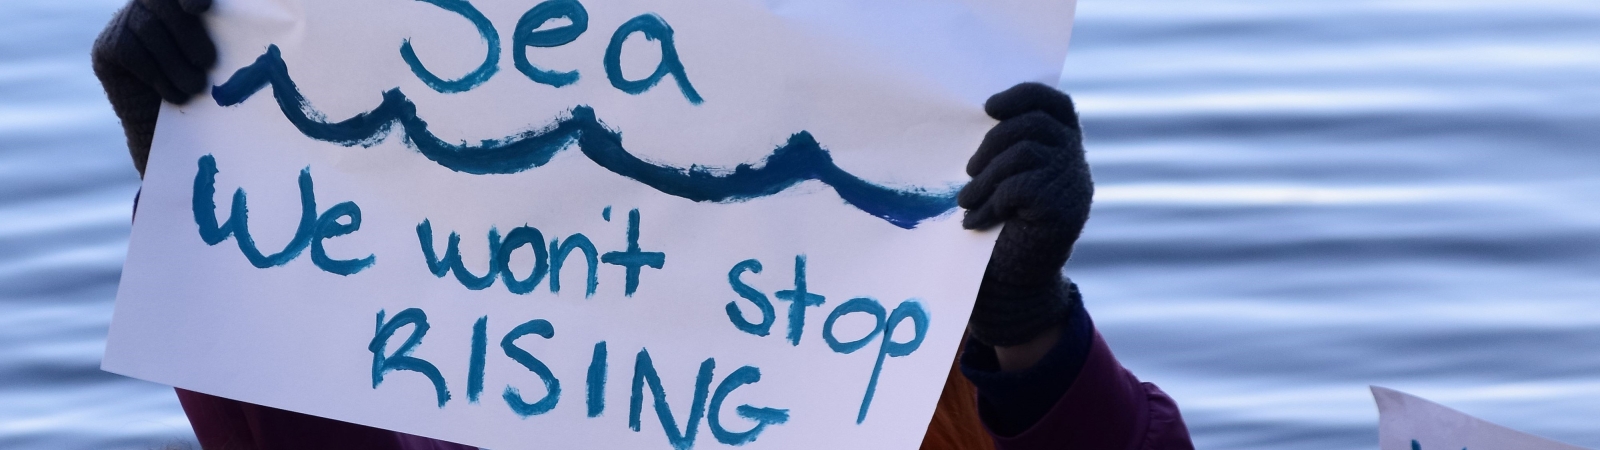 a person at a rally holding a sign that reads "like the sea, we won't stop rising"